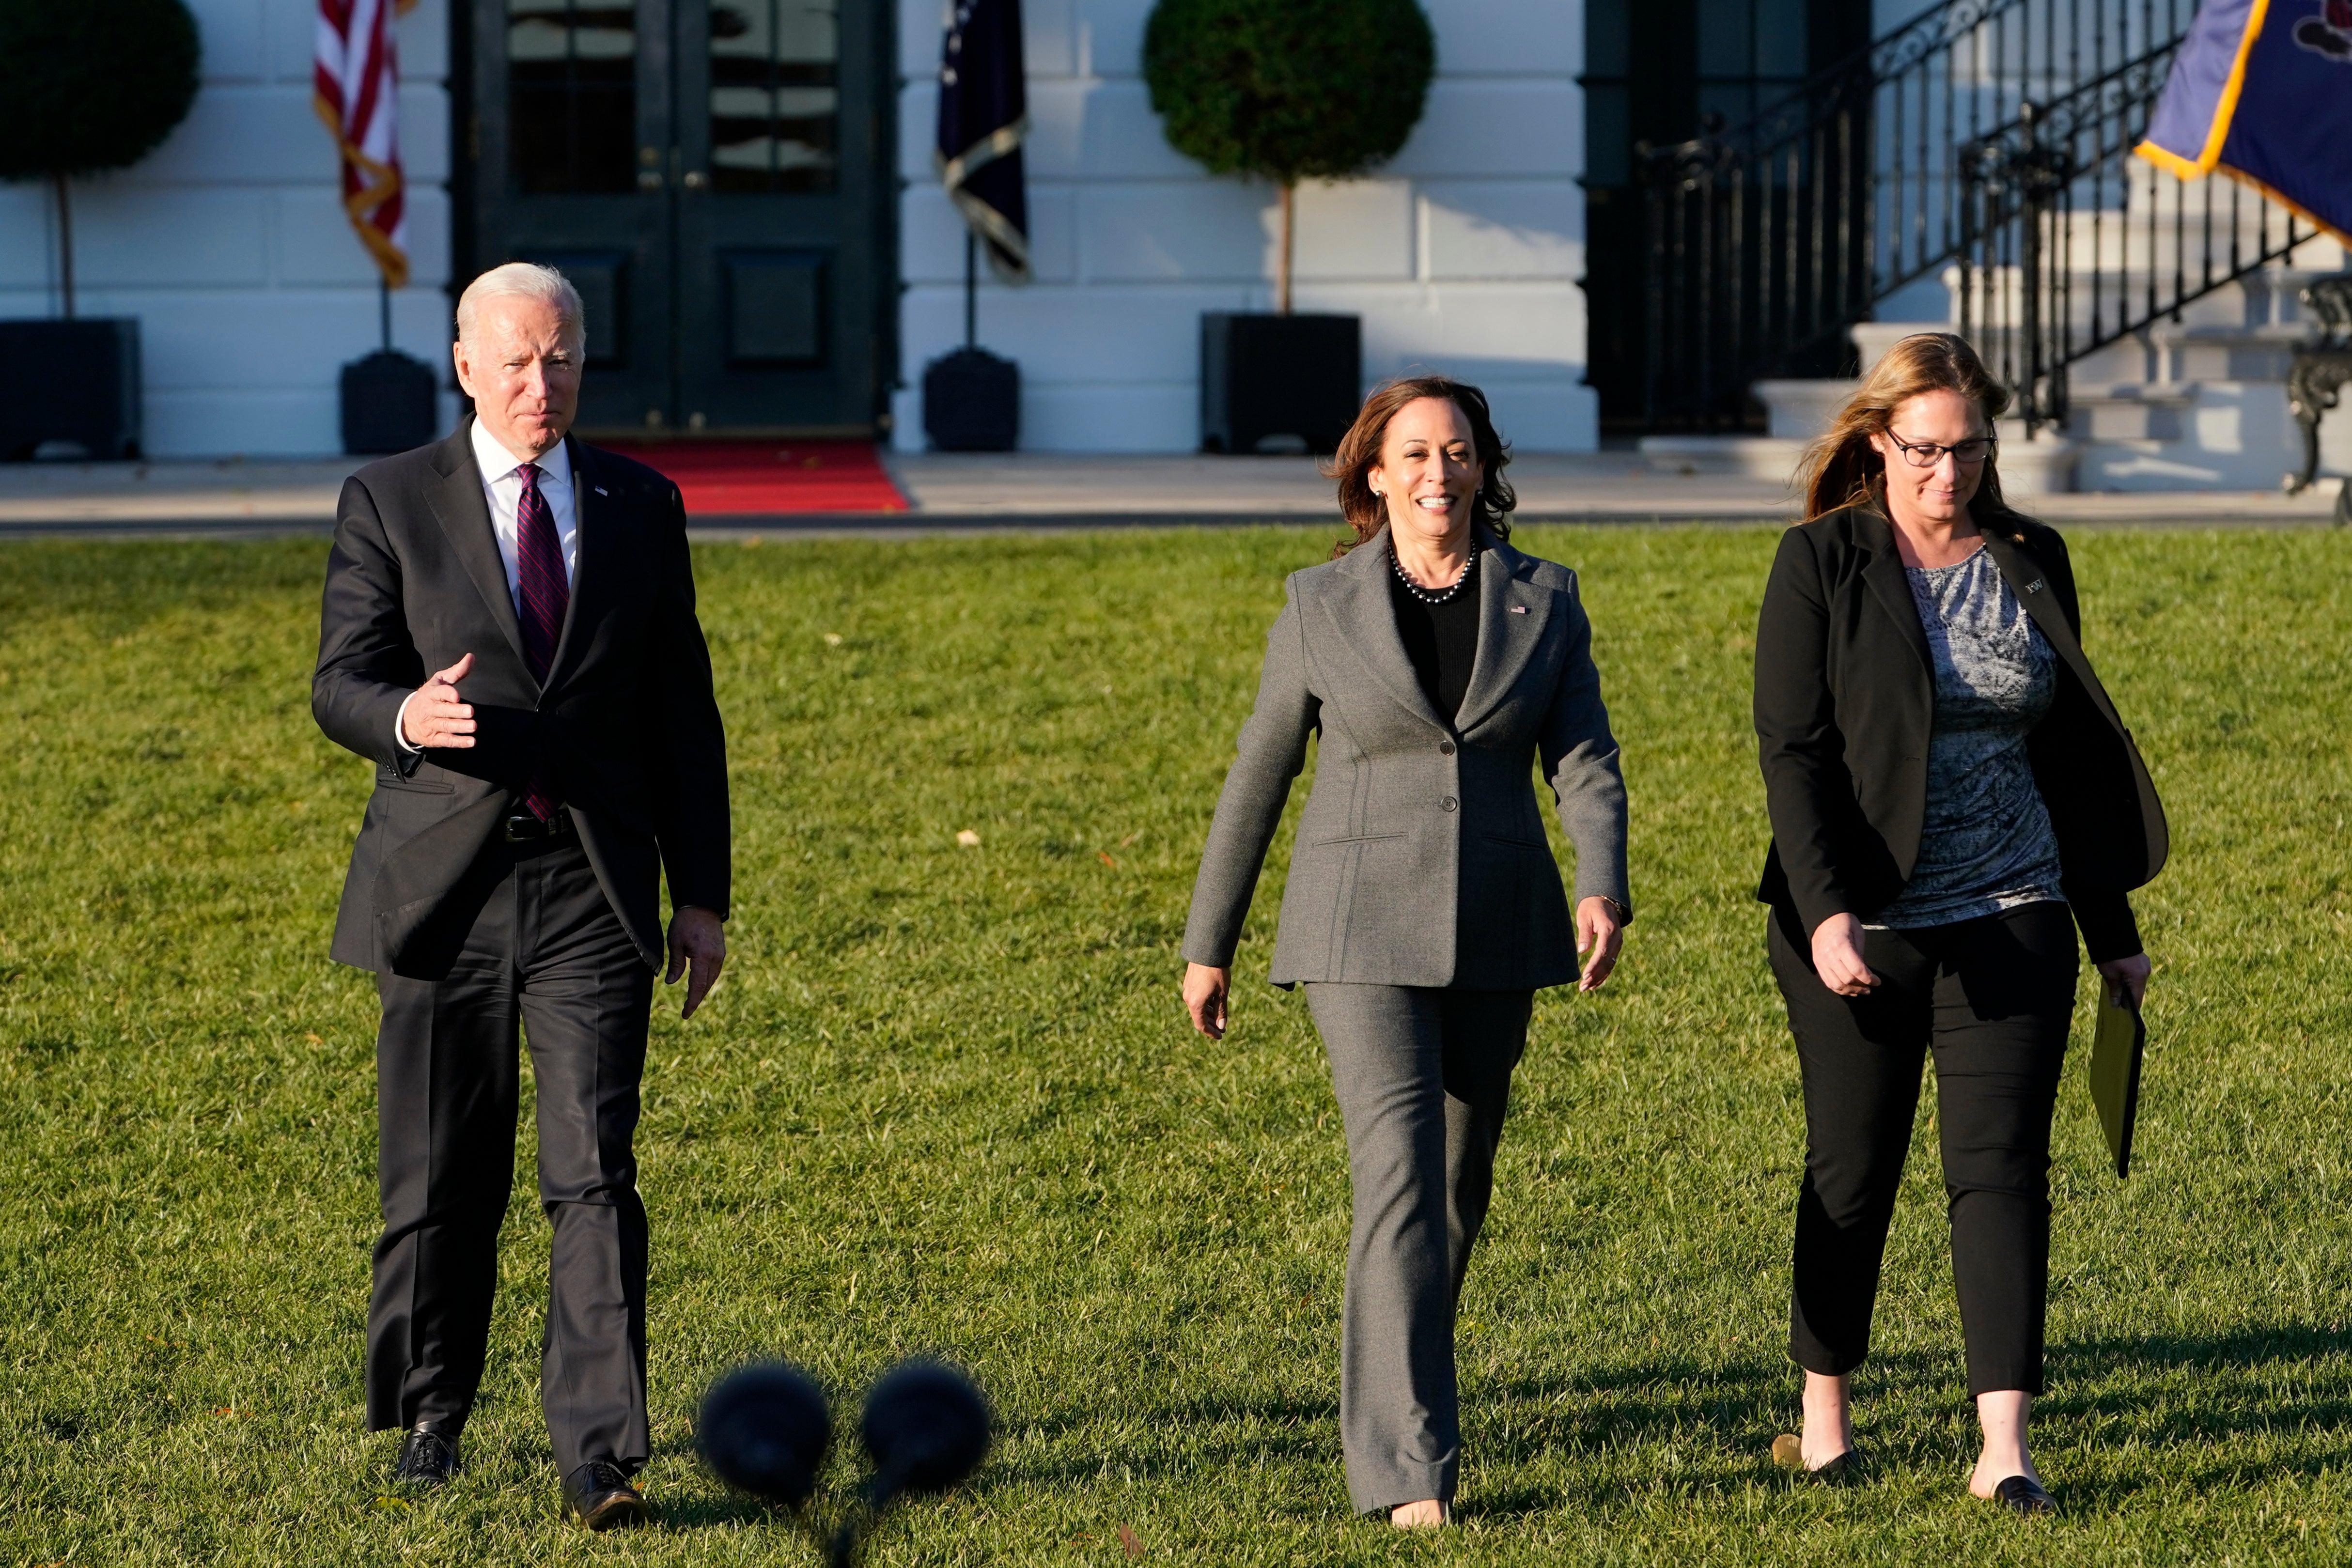 President Joe Biden, with Vice President Kamala Harris and Heather Kurtenbach, with Iron Workers Local 86 in Seattle, arrives to speak before signing the $1.2 trillion bipartisan infrastructure bill during a ceremony on the South Lawn of the White House on Monday